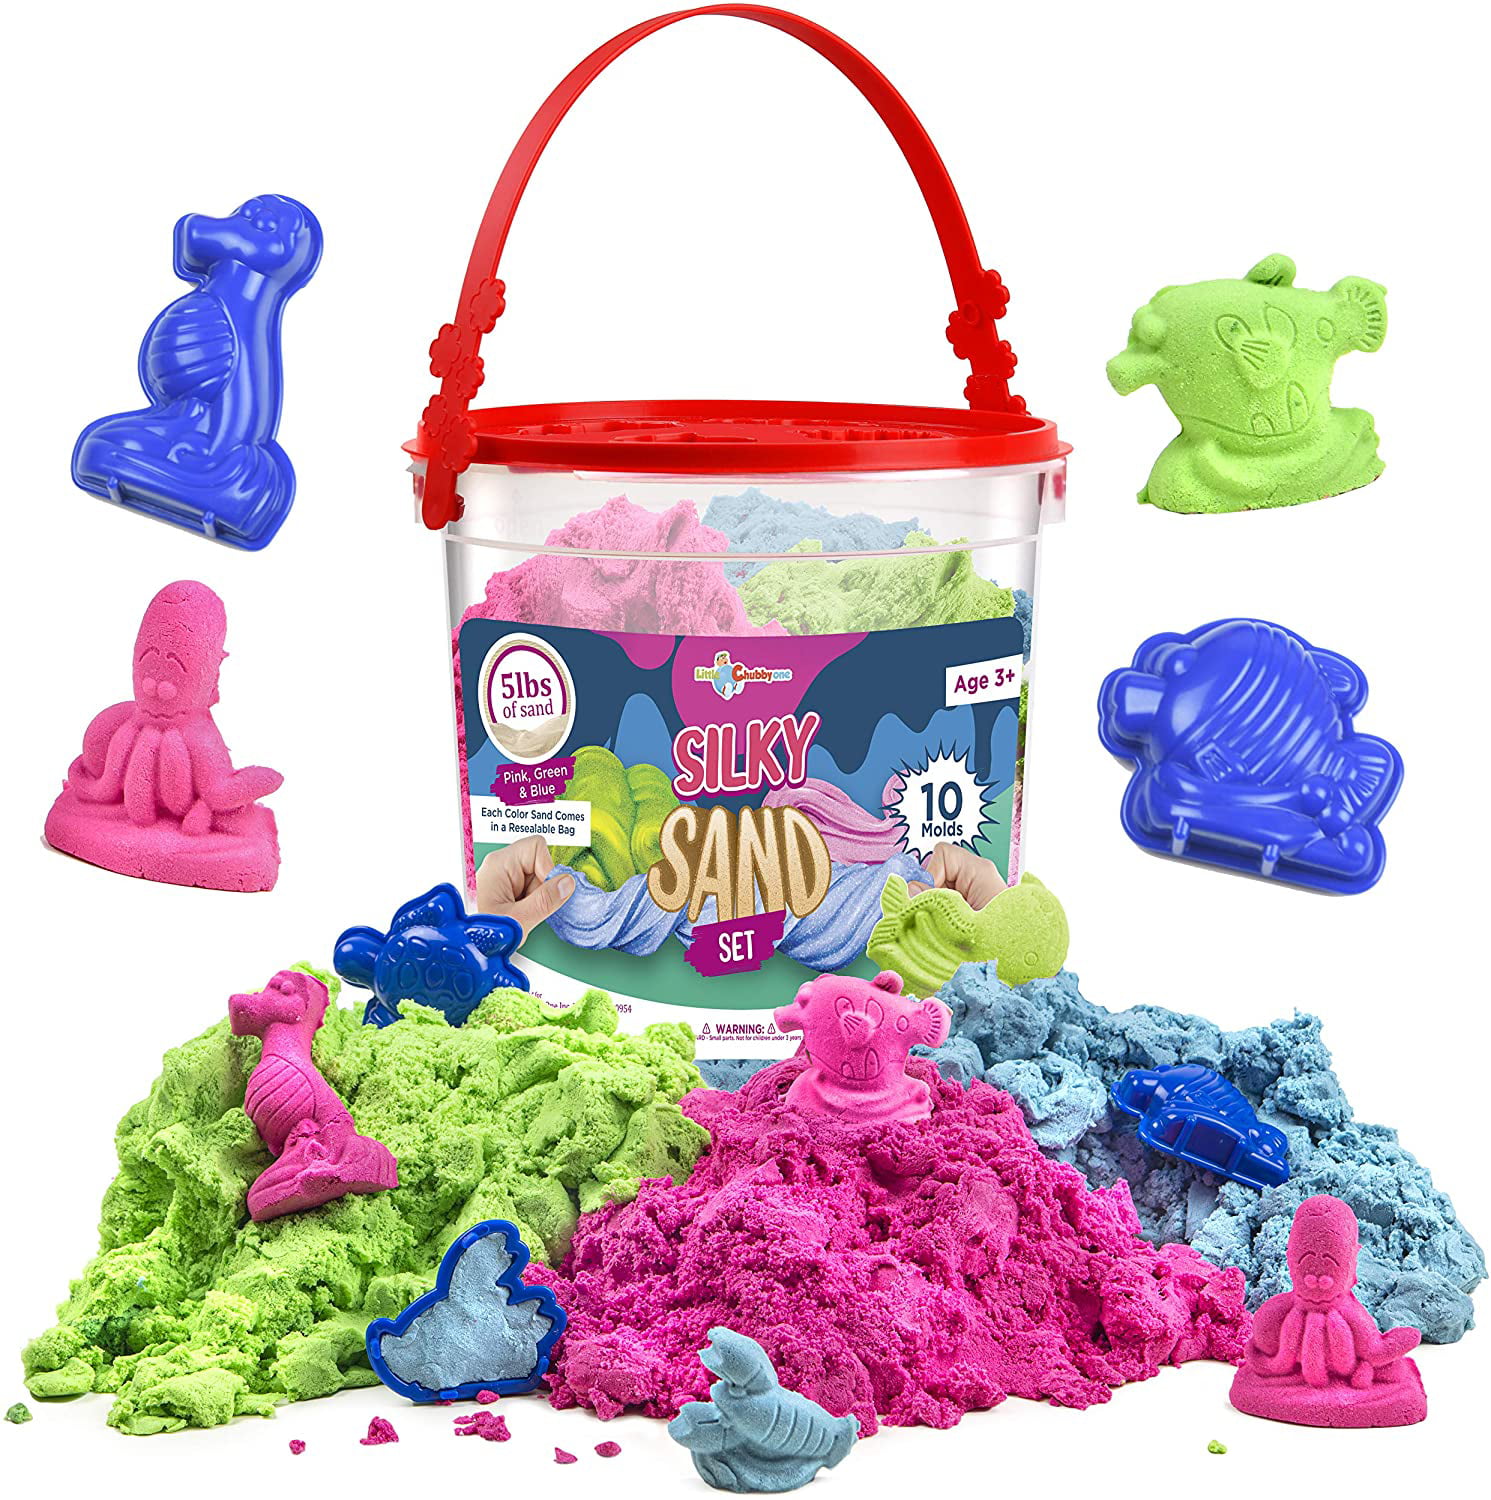 Magic Sand Set Natural LITTLE CHUBBY ONE 2 Lb Play Sand Play Set with Molds Helps Develop Creativity and Motor Skills Mess Free Play Comes in for Boys and Girls 